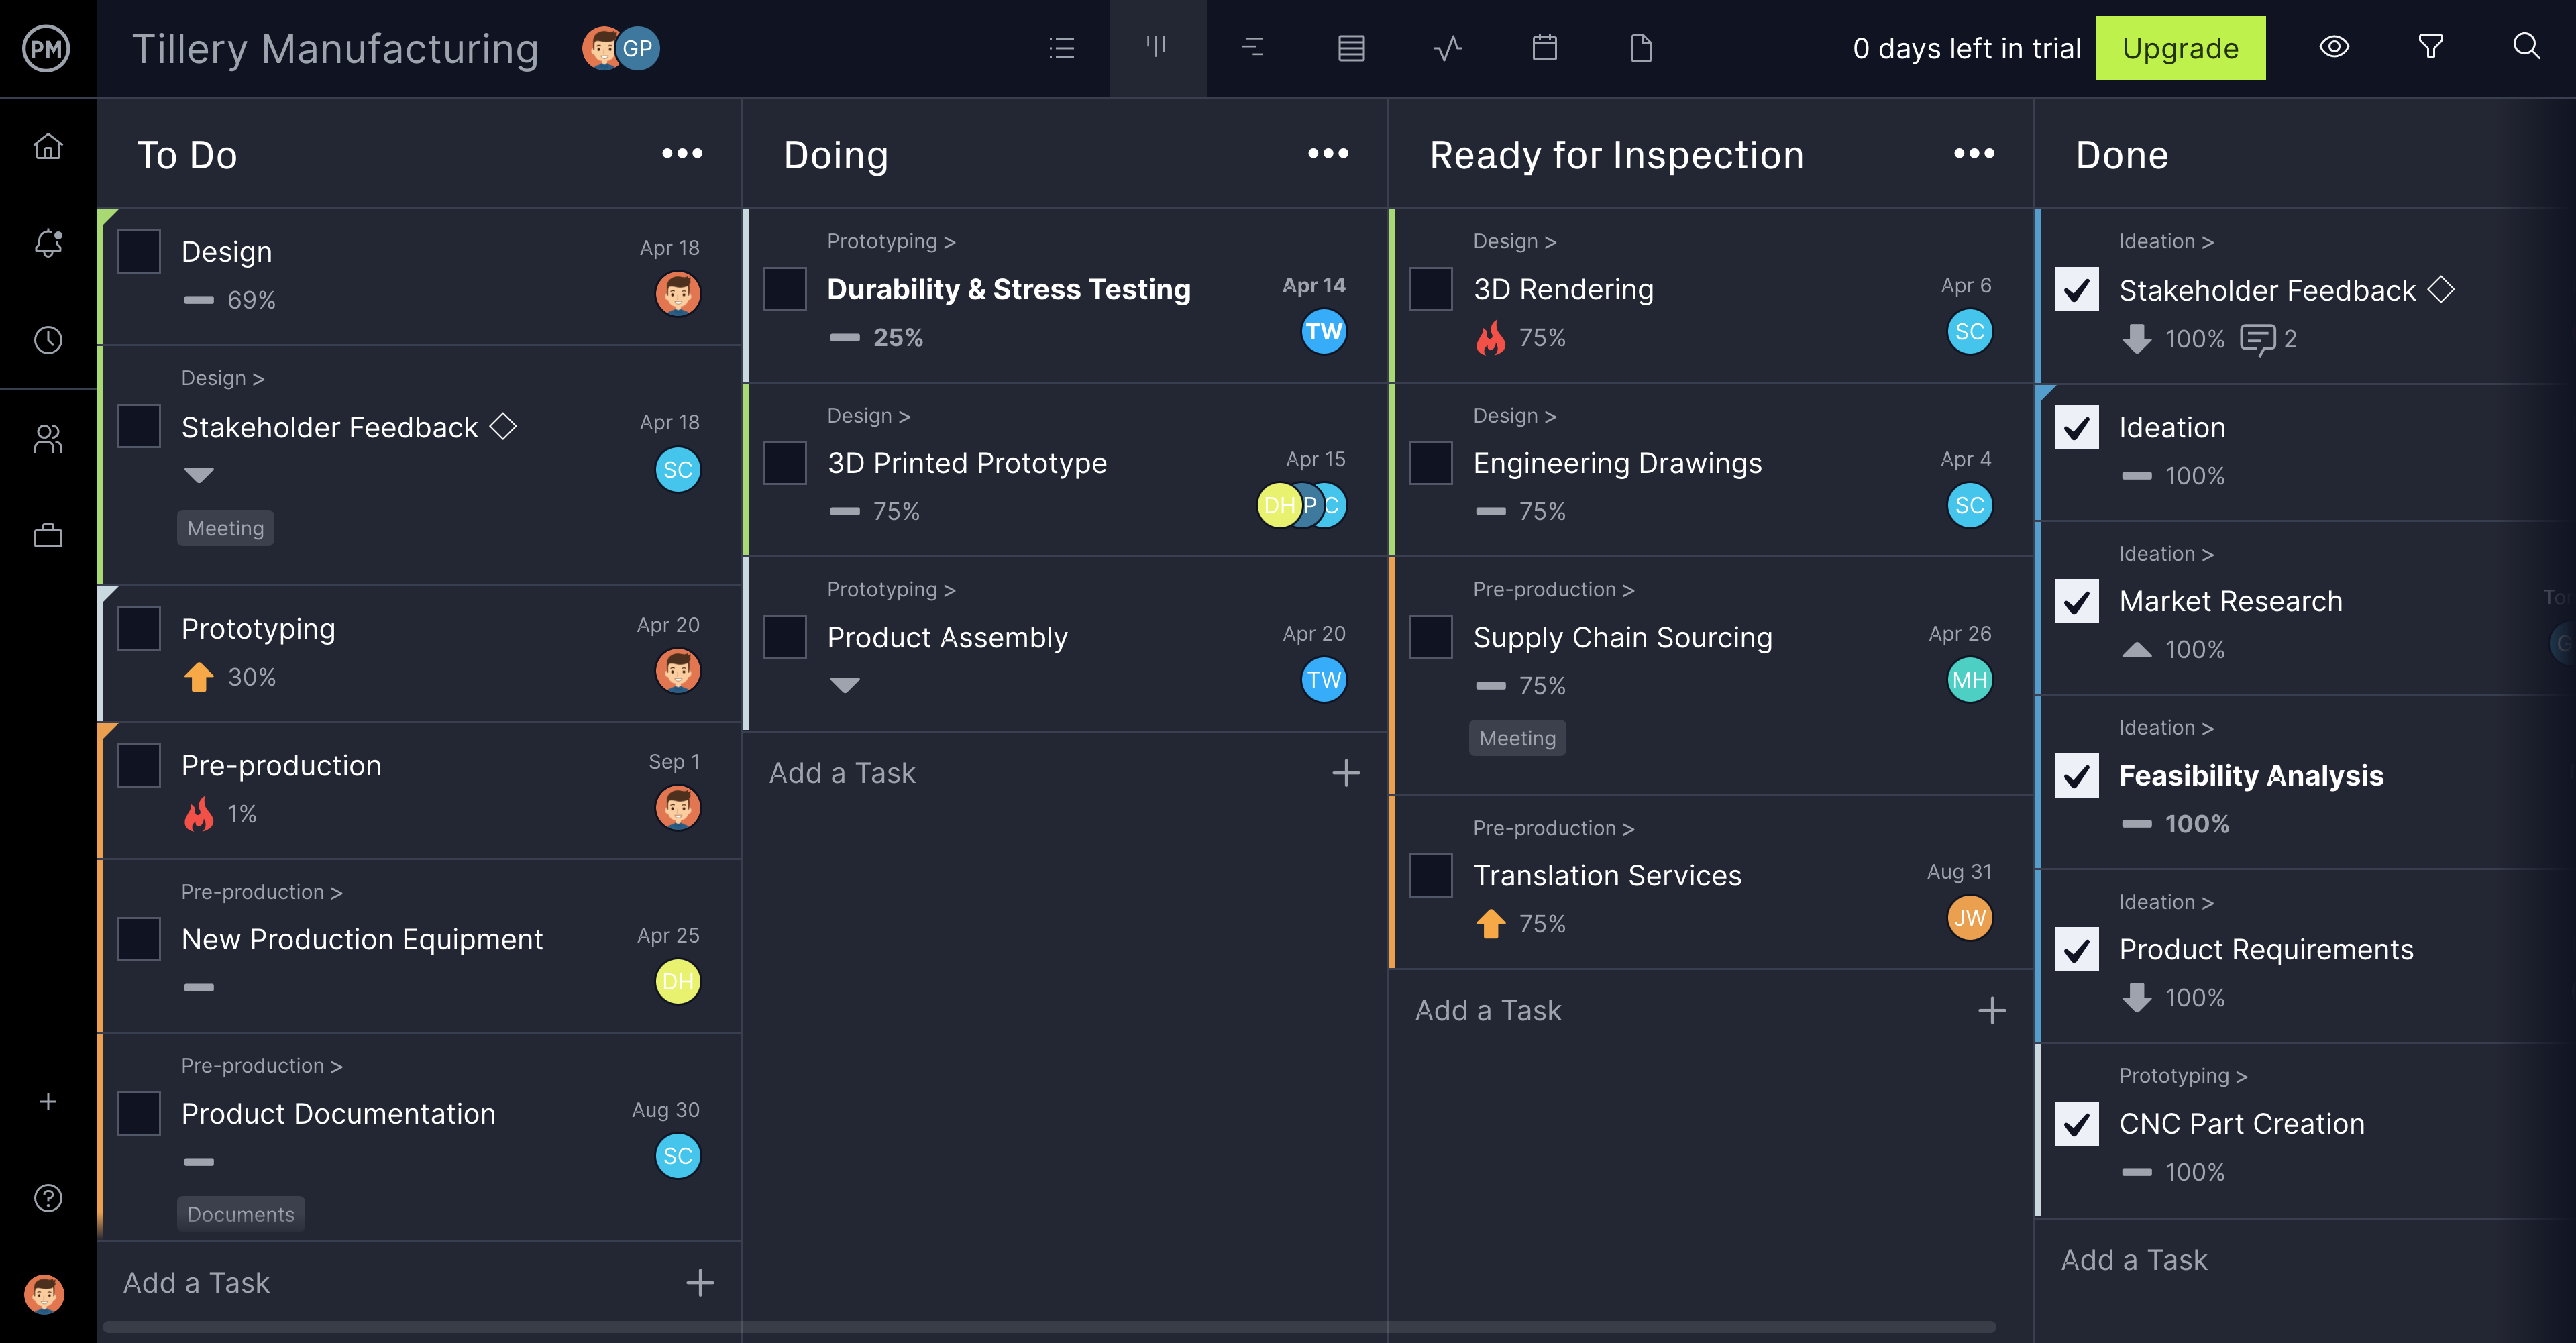 The Board view helps teams tailor workflows for their specific needs, pinpoint bottlenecks in production cycles and more.